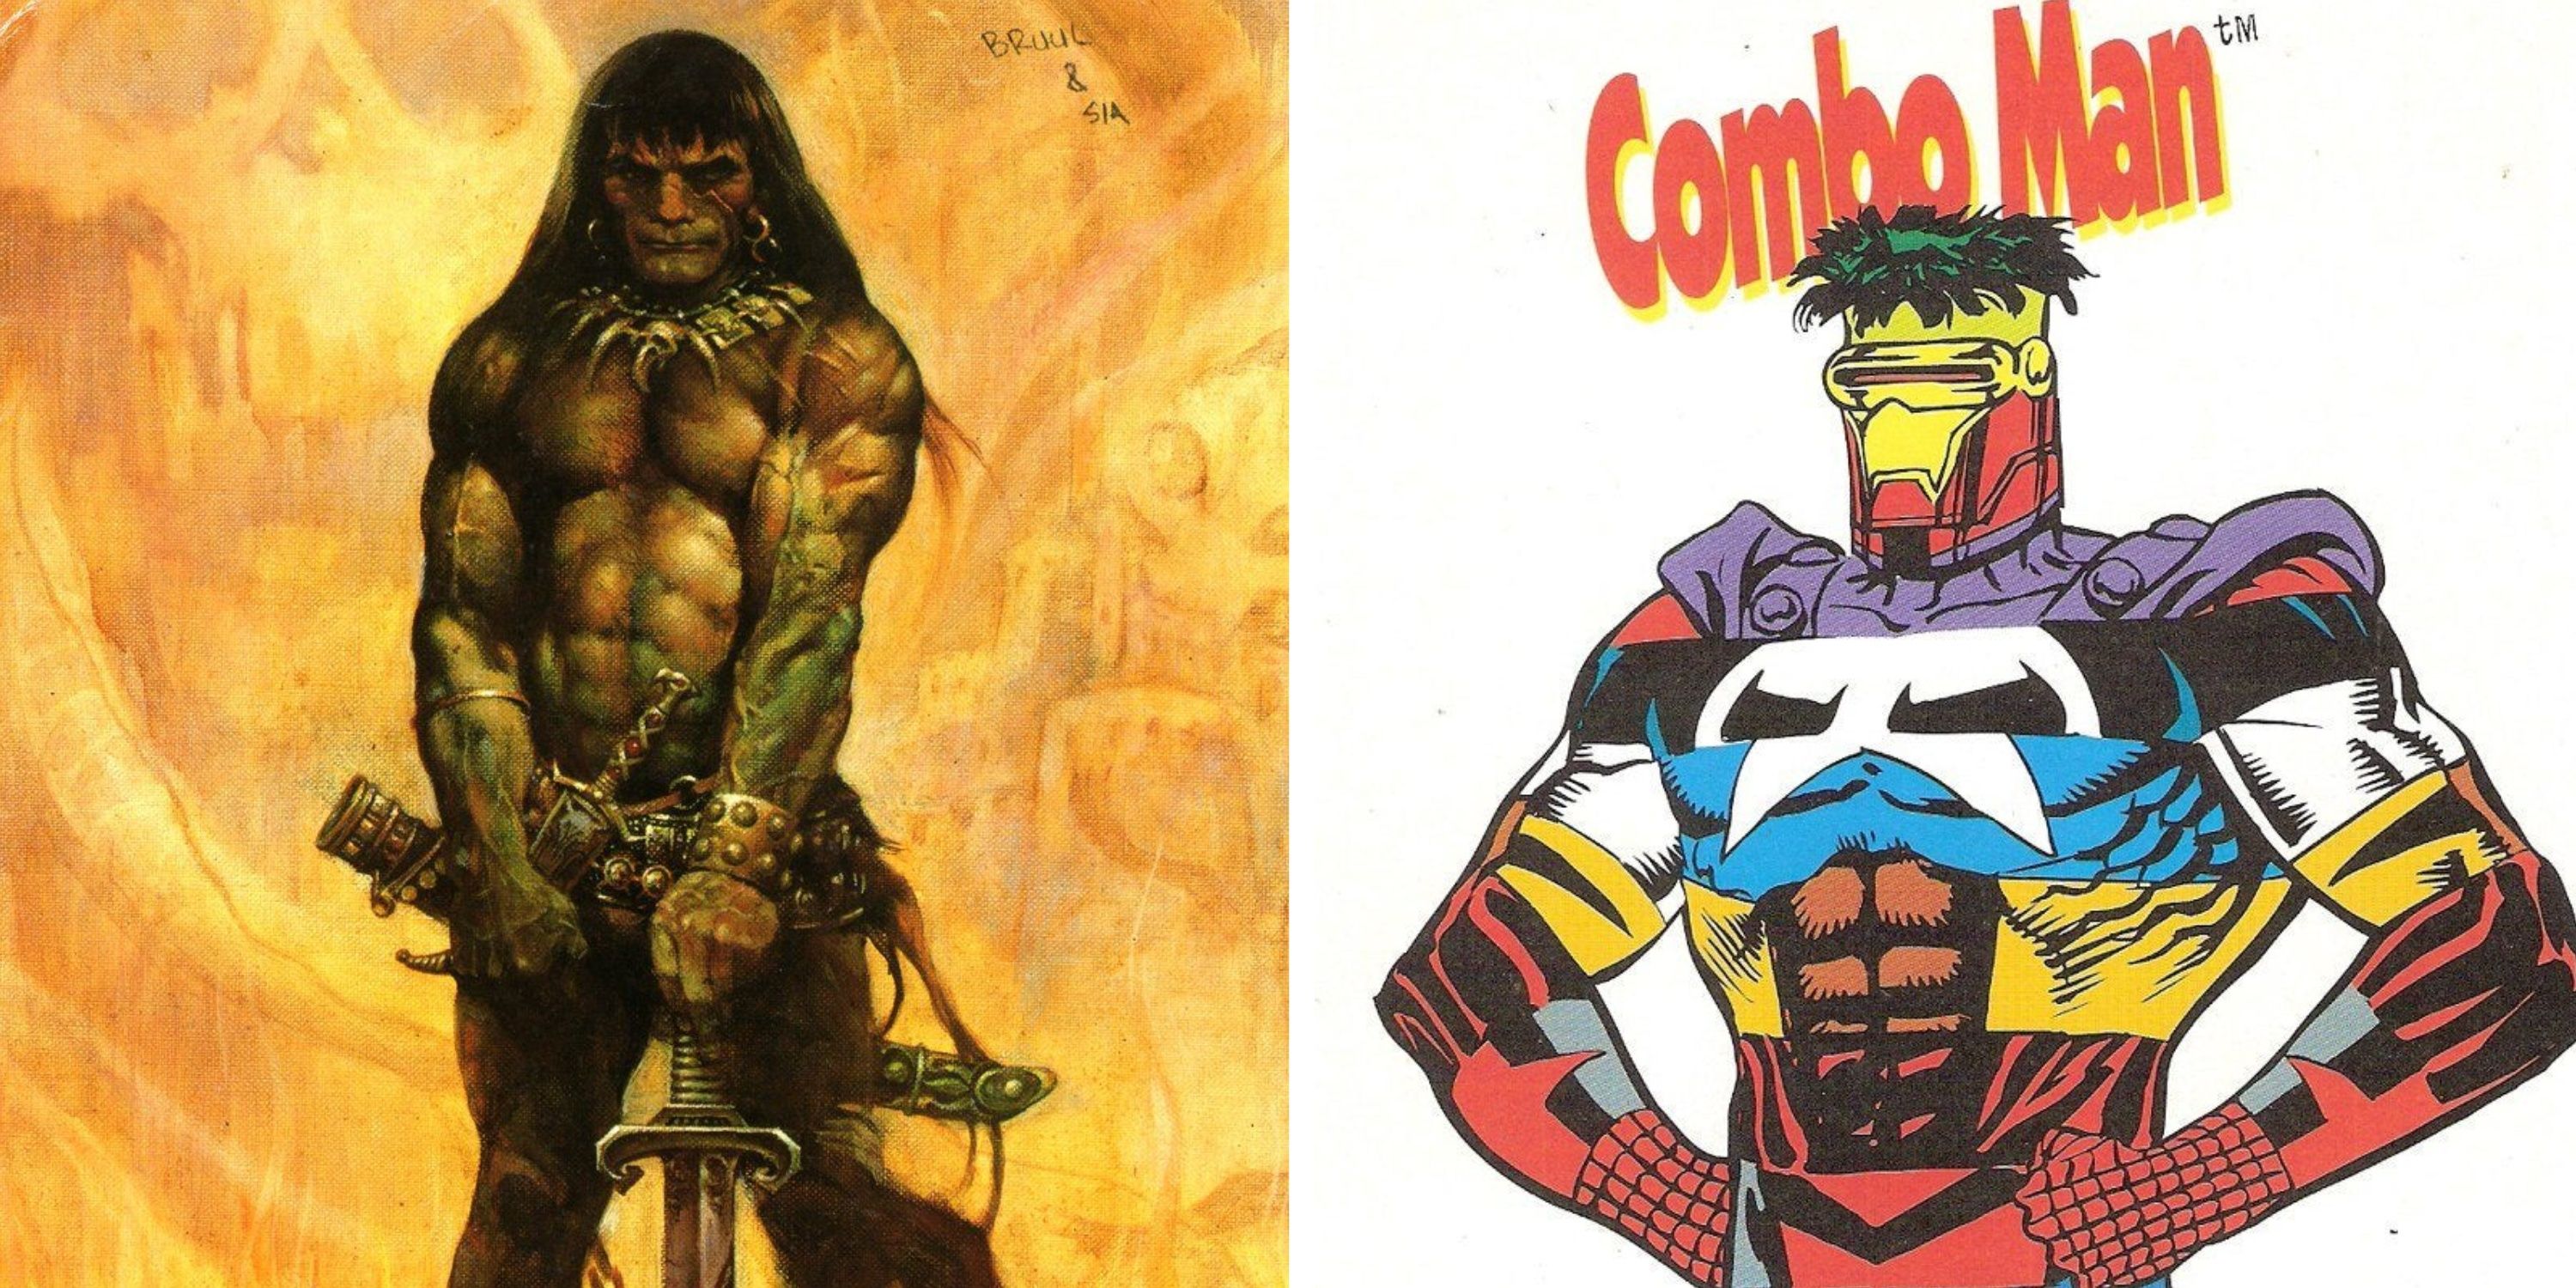 A split image of Conan the Barbarian (left) and Combo Man (right) in Marvel Comics